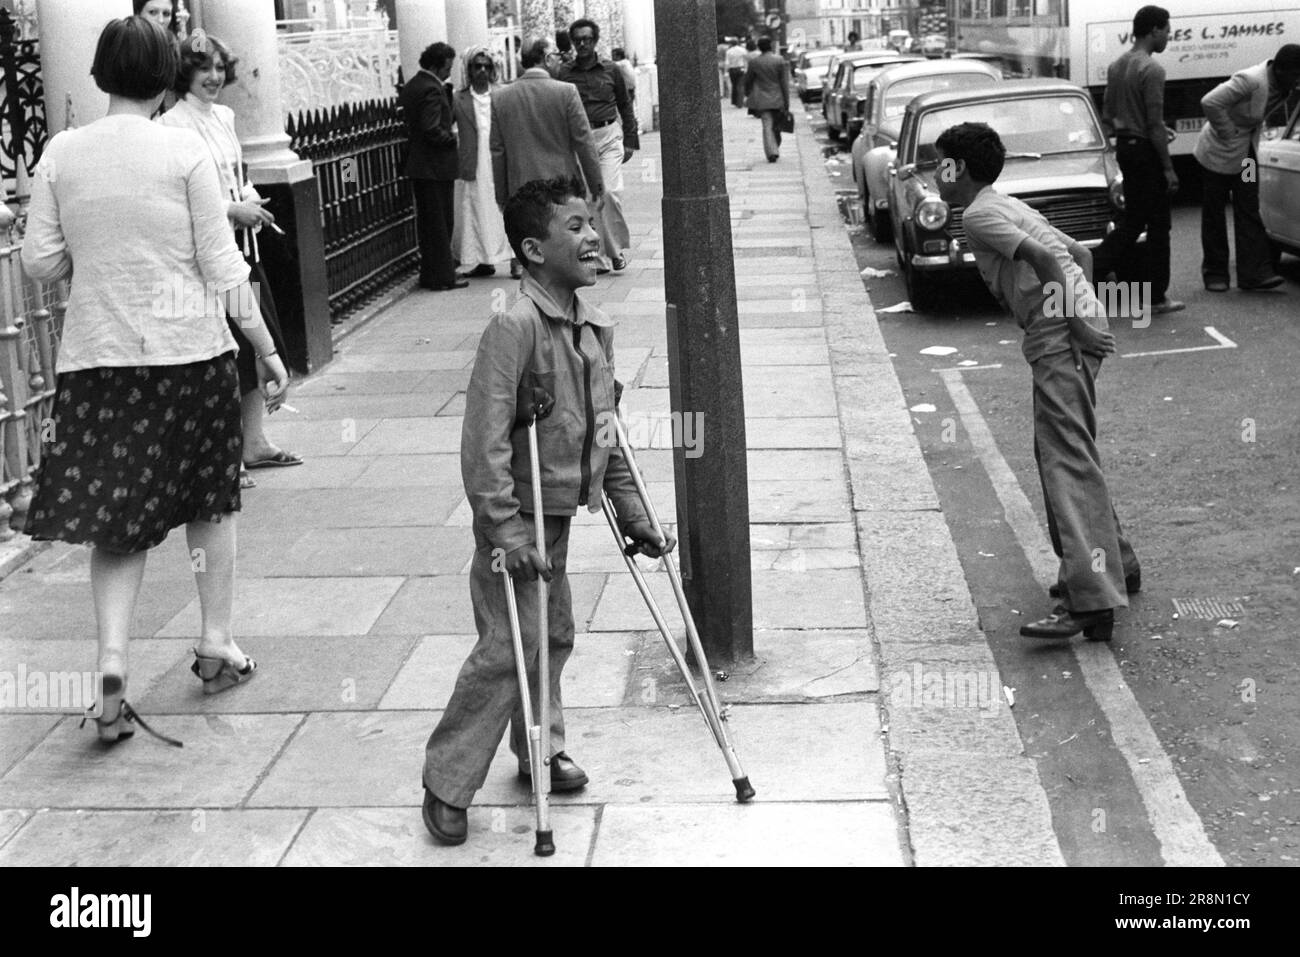 Arab children playing in street, one boy on crutches. Earls Court London 1970s.  Middle Eastern people came to Britain for subsidised health care in Harley Street clinics. They mainly stayed in cheap hotels in Earls Court. Middle Eastern children playing in the street. Earls Court, London, England circa 1977 70s UK HOMER SYKES Stock Photo